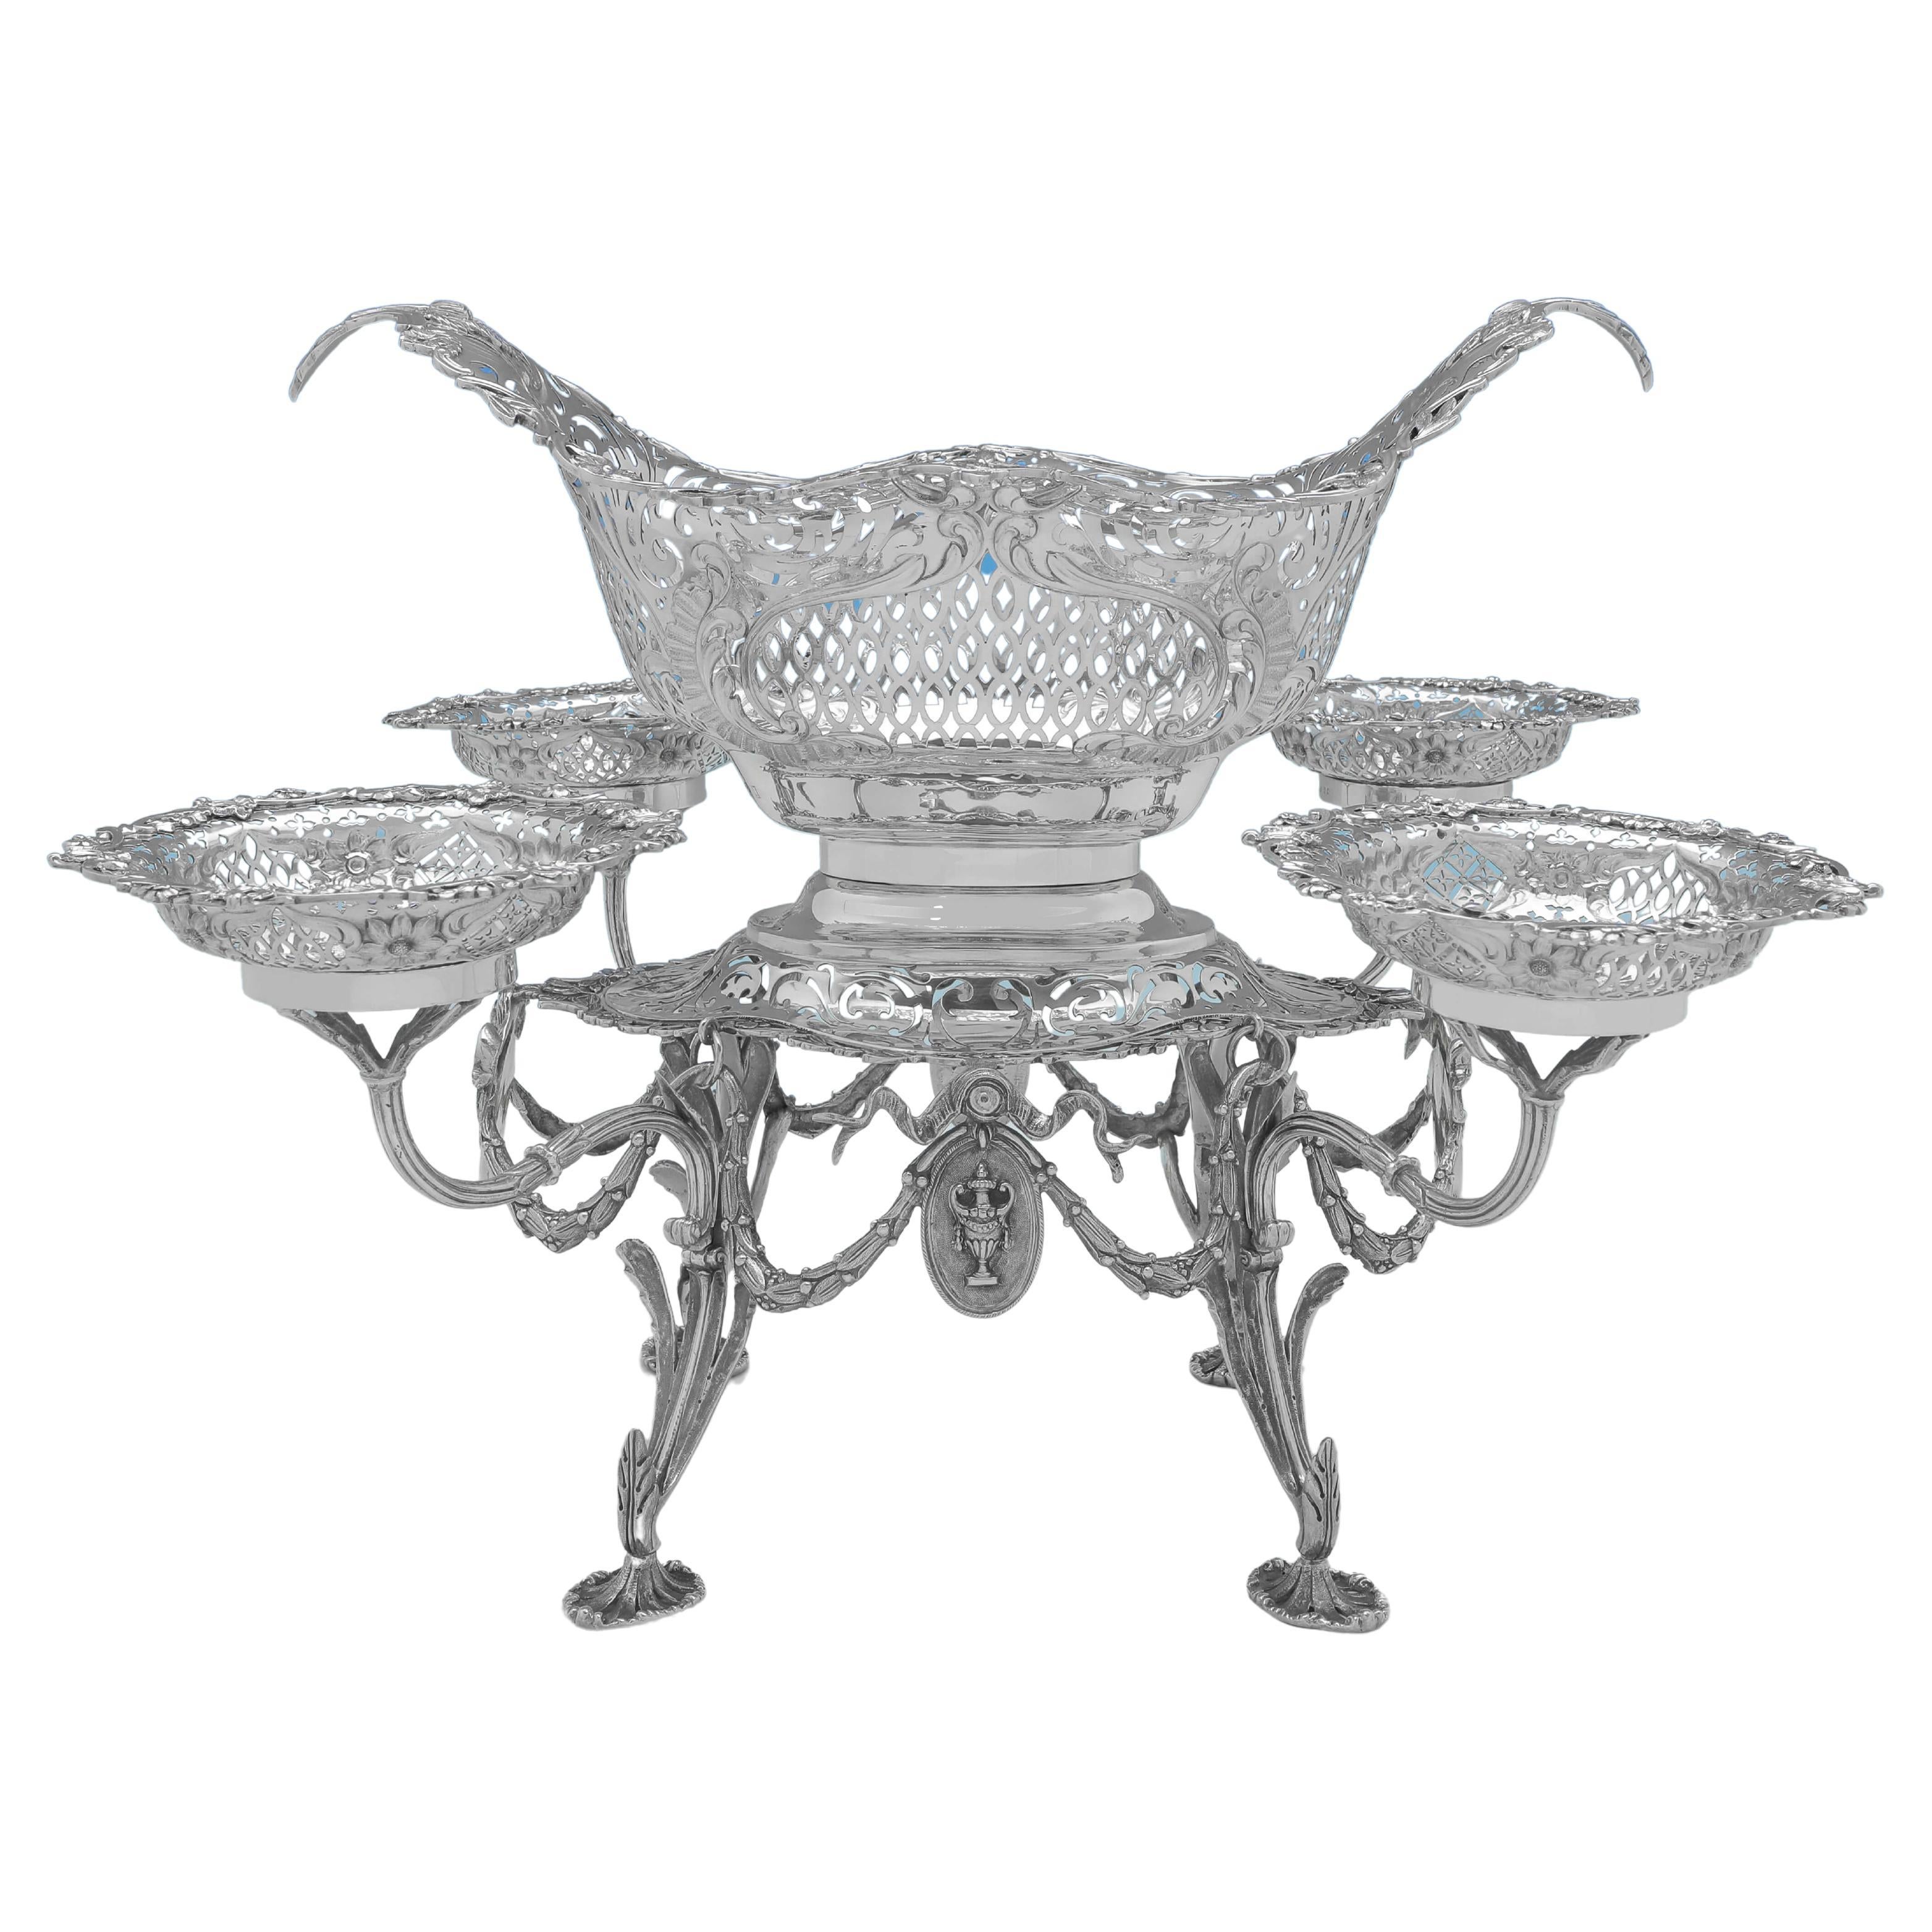 Neoclassical Revival Antique Edwardian Sterling Silver Centrepiece Epergne, 1910